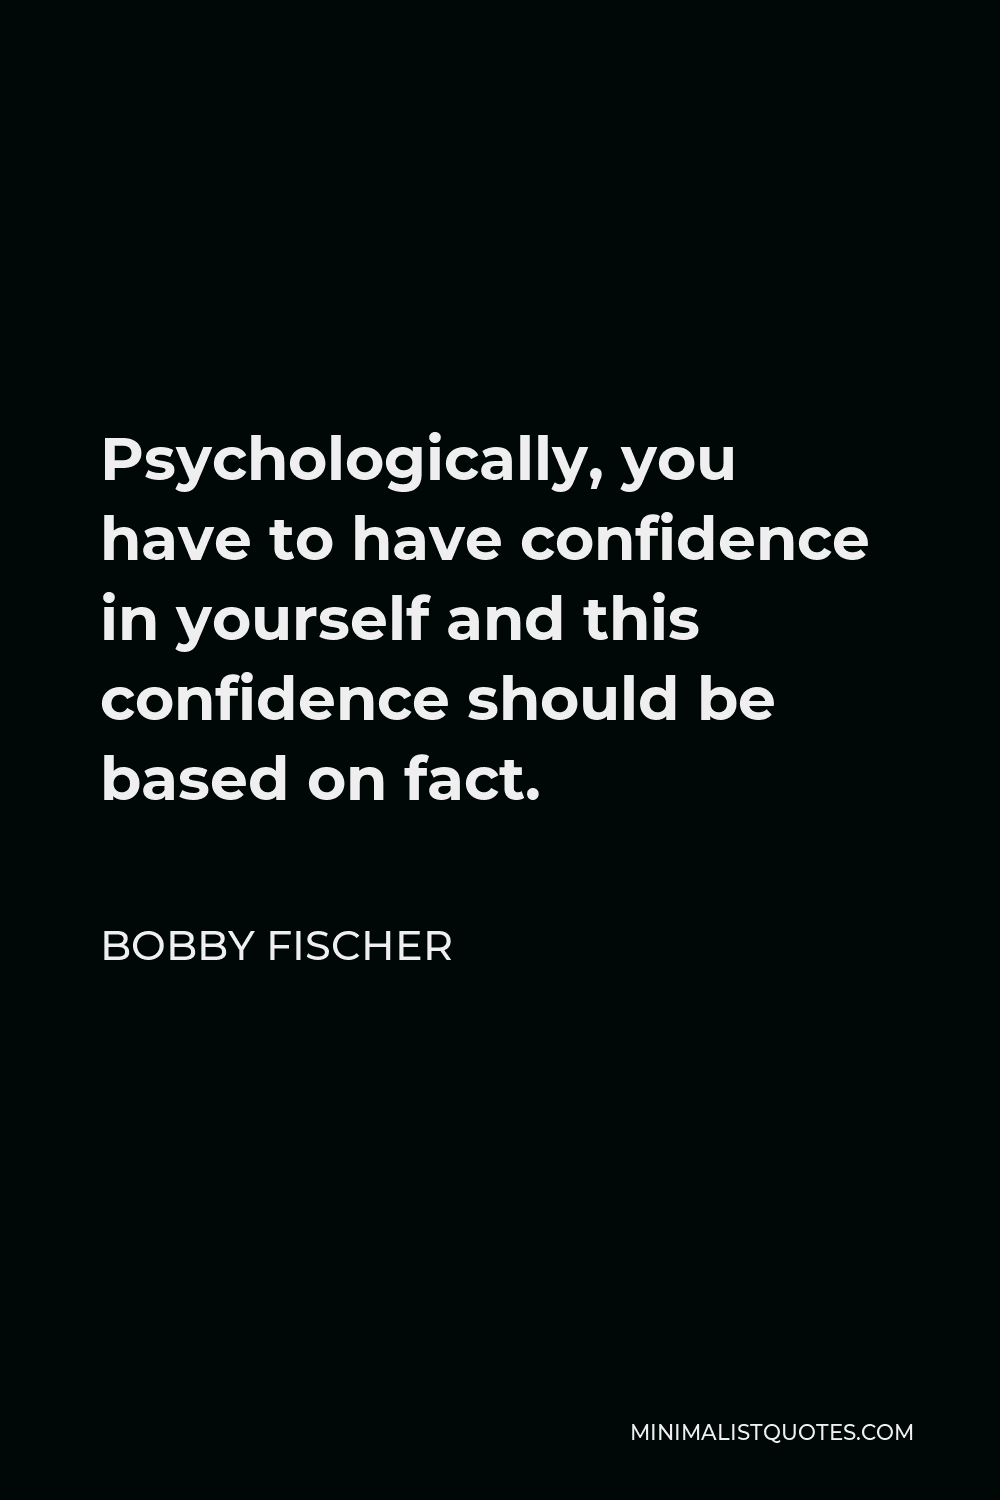 Bobby Fischer Quote - Psychologically, you have to have confidence in yourself and this confidence should be based on fact.